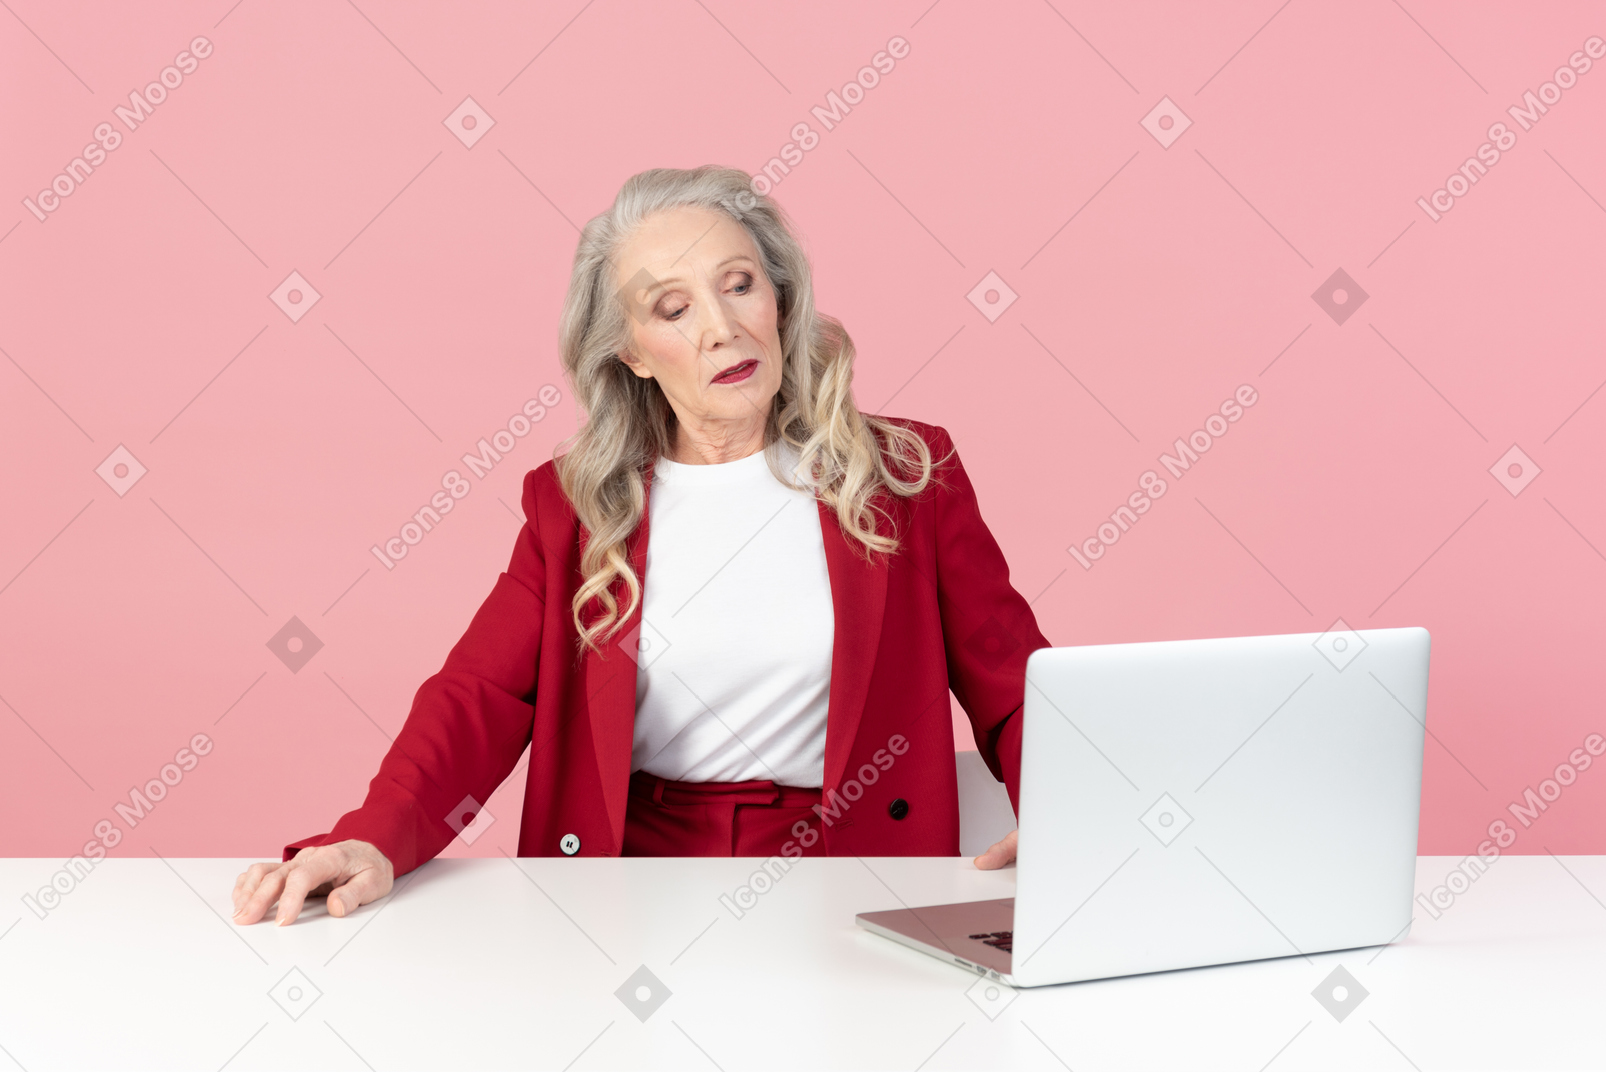 Old woman working on computer